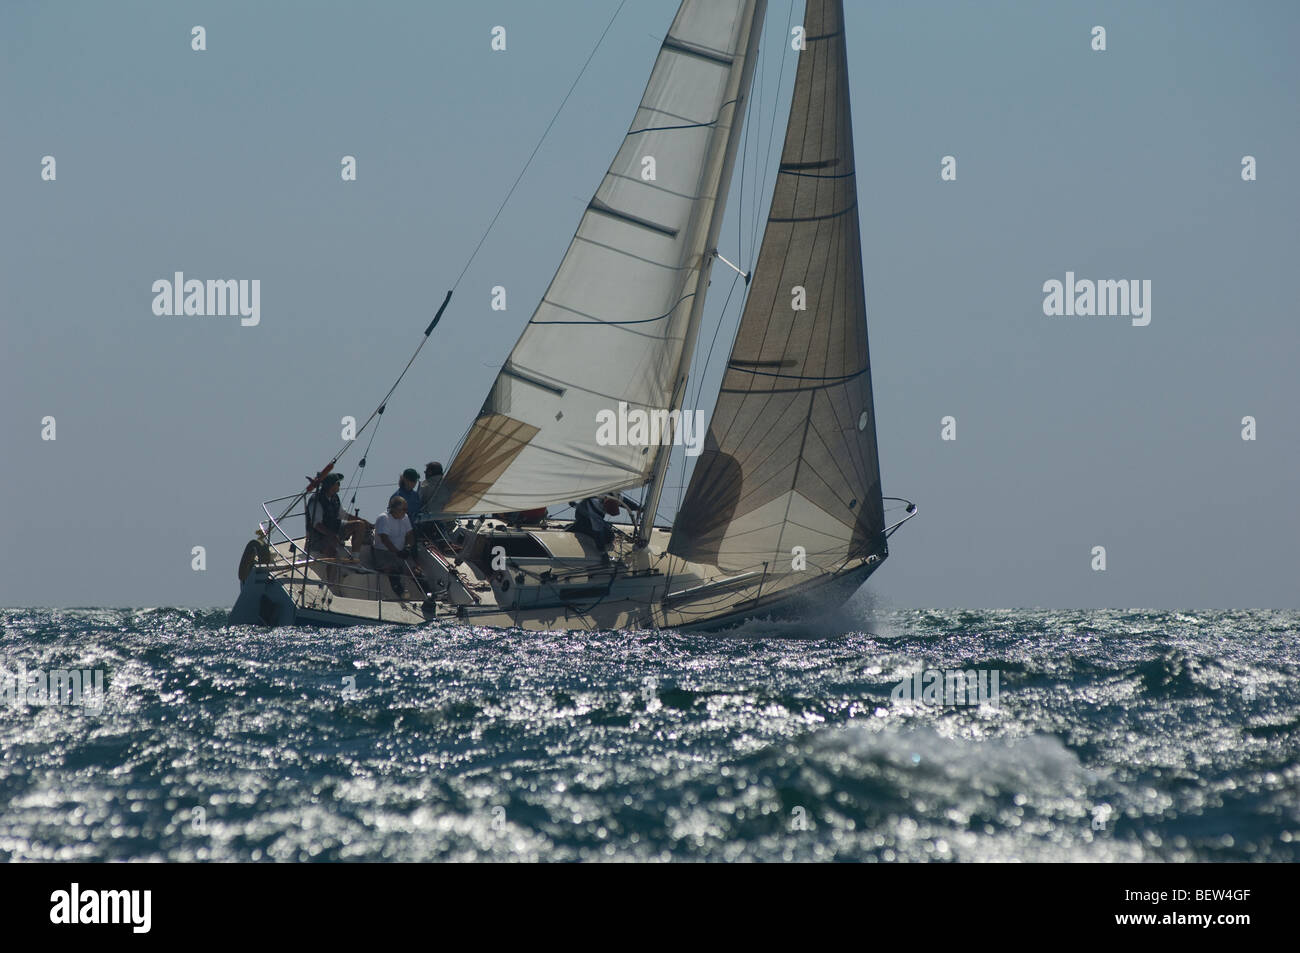 Crew members on board yacht competing in team sailing event, California Stock Photo